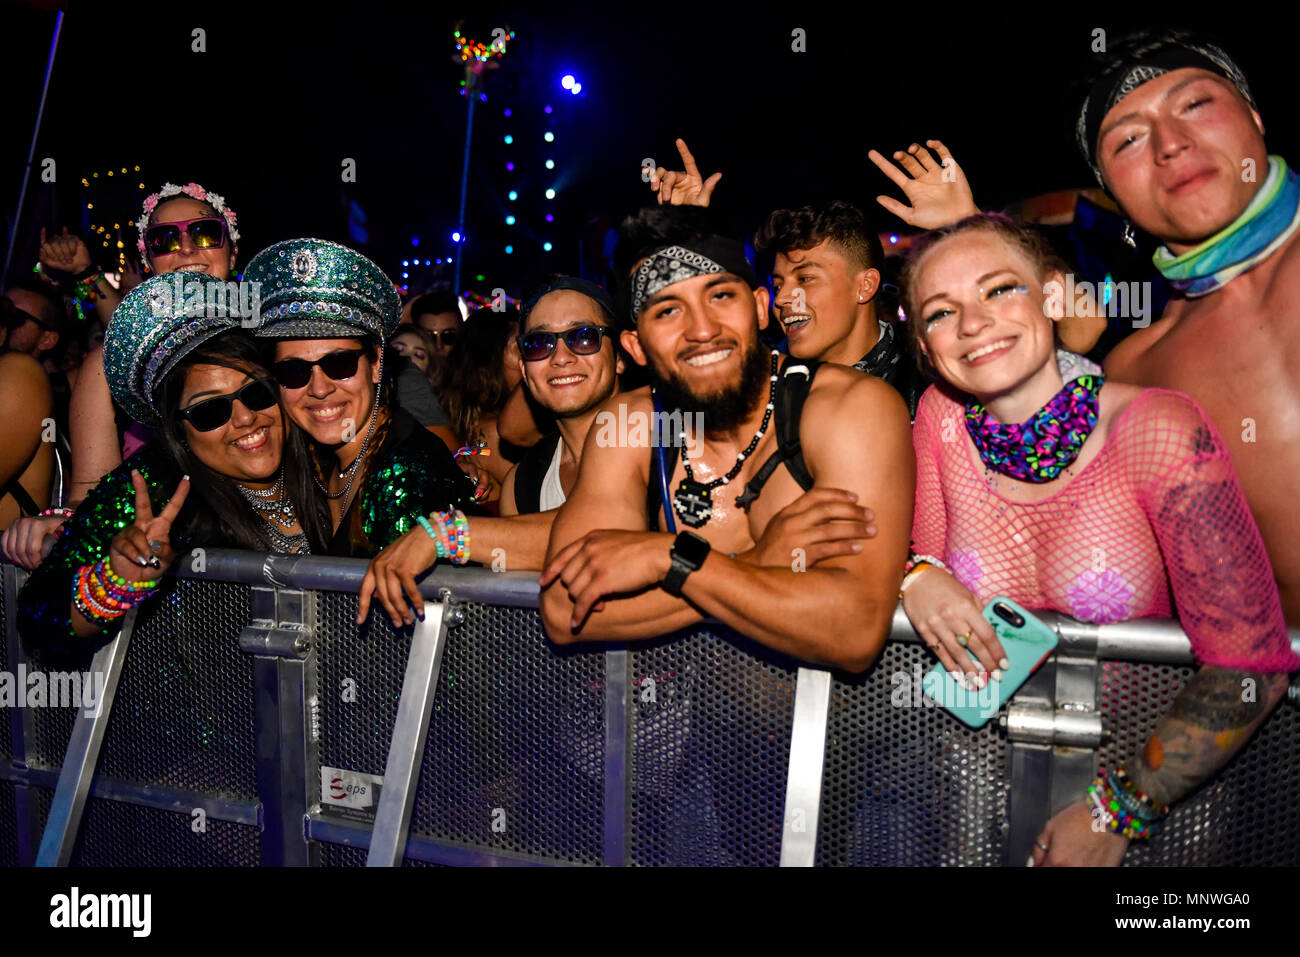 Las Vegas, Nevada,  USA. May 18, 2018, Festival goers at the 2018 Electric Daisy Carnival, edc festival, Day 1, Credit: Ken Howard Images/Alamy Live News Stock Photo